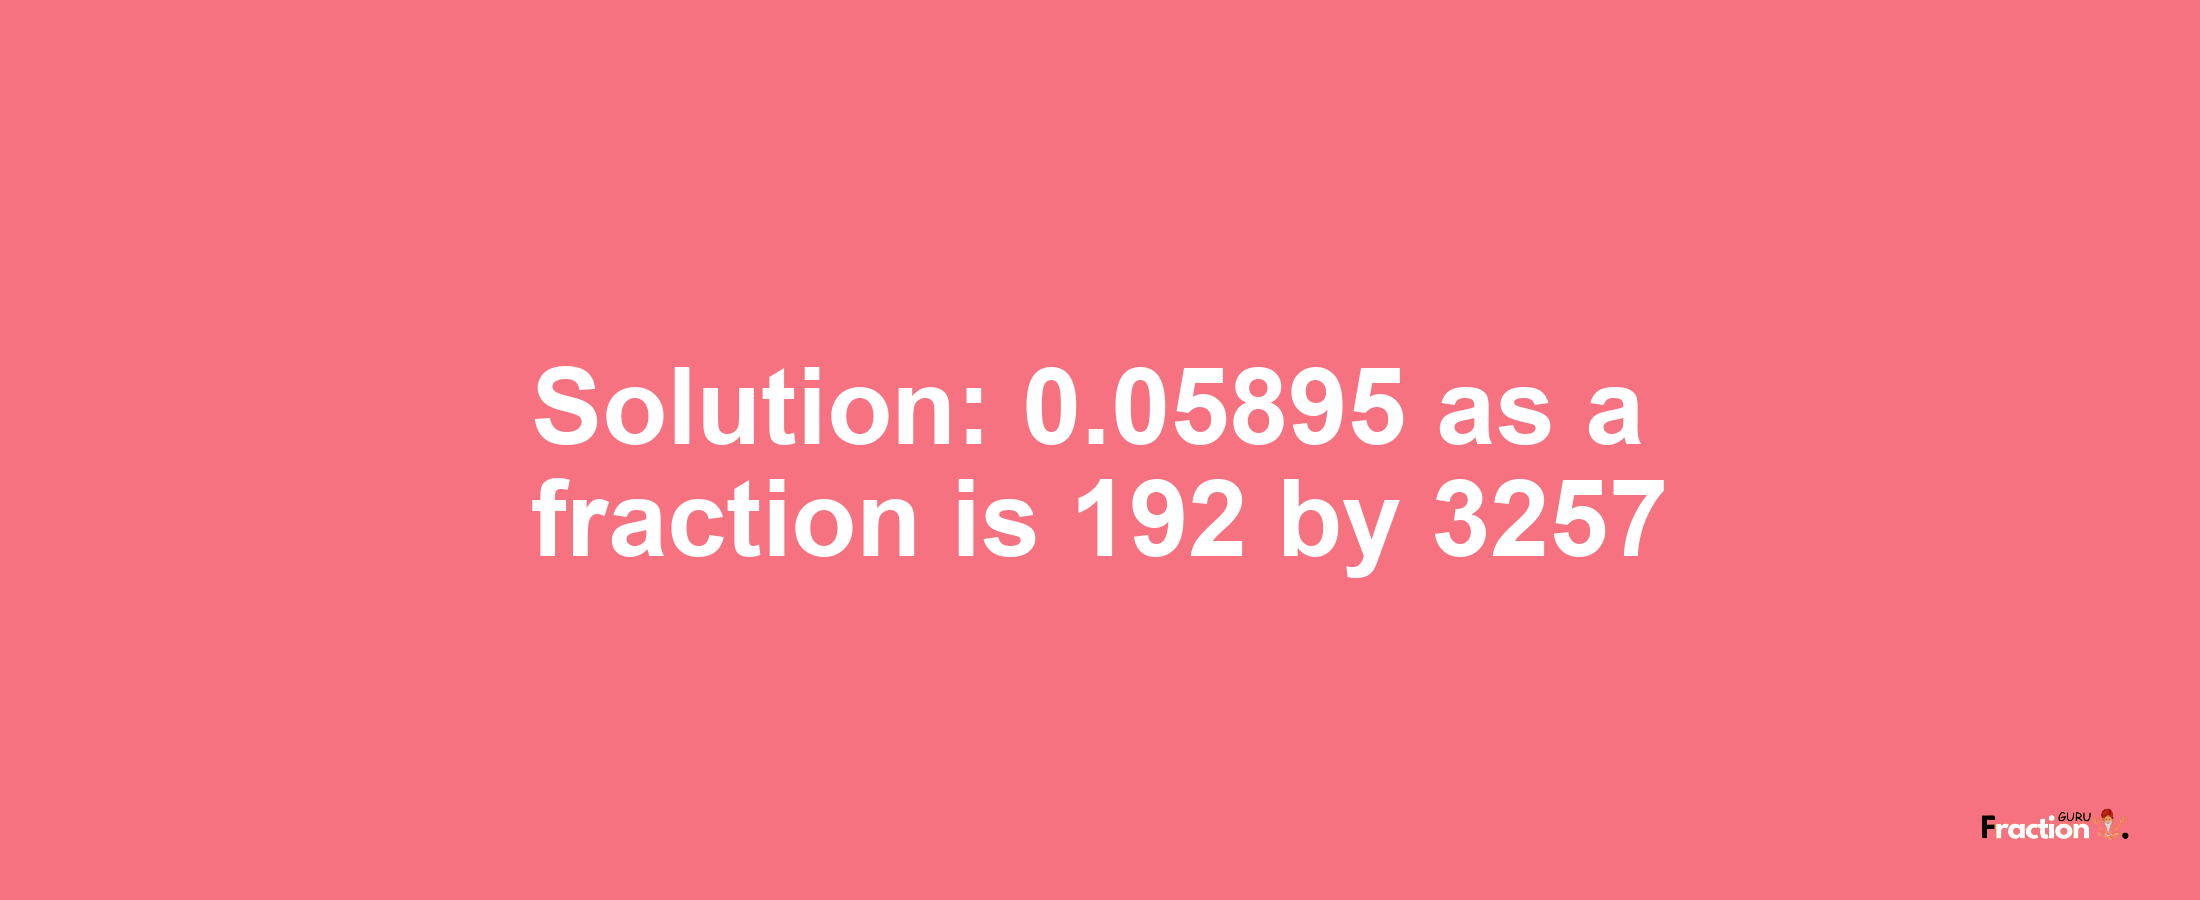 Solution:0.05895 as a fraction is 192/3257